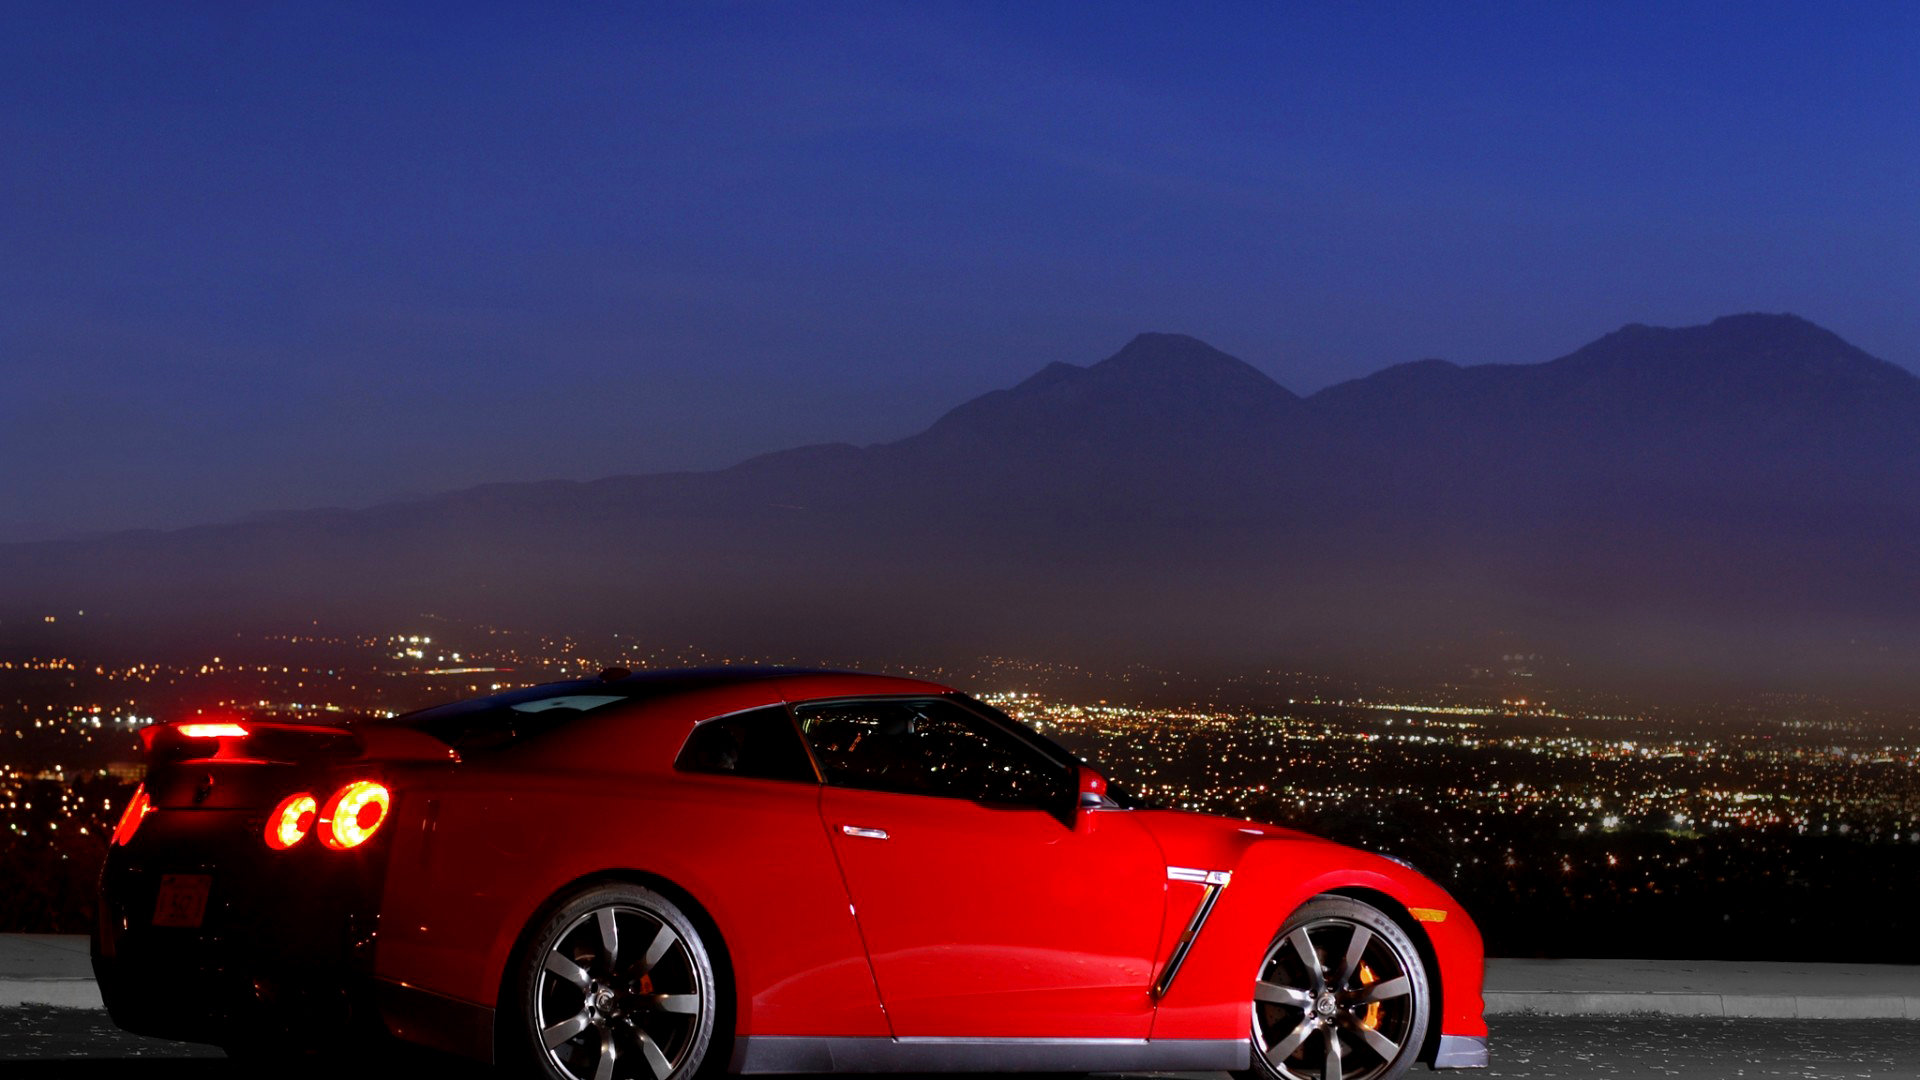 General 1920x1080 car red cars lights mountains Nissan road city vehicle Nissan GT-R Japanese cars